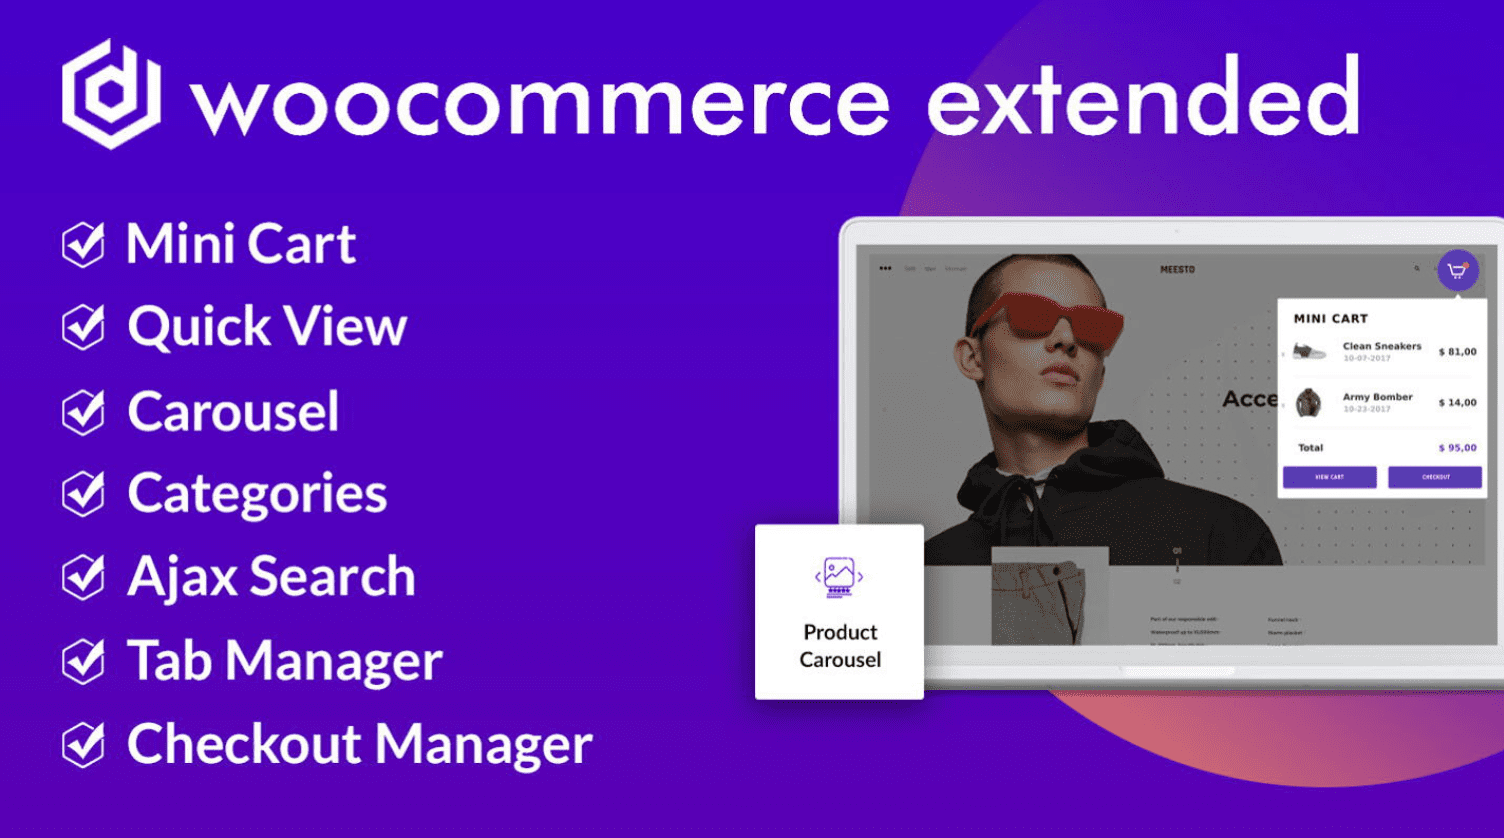 Where to Purchase Divi WooCommerce Extended